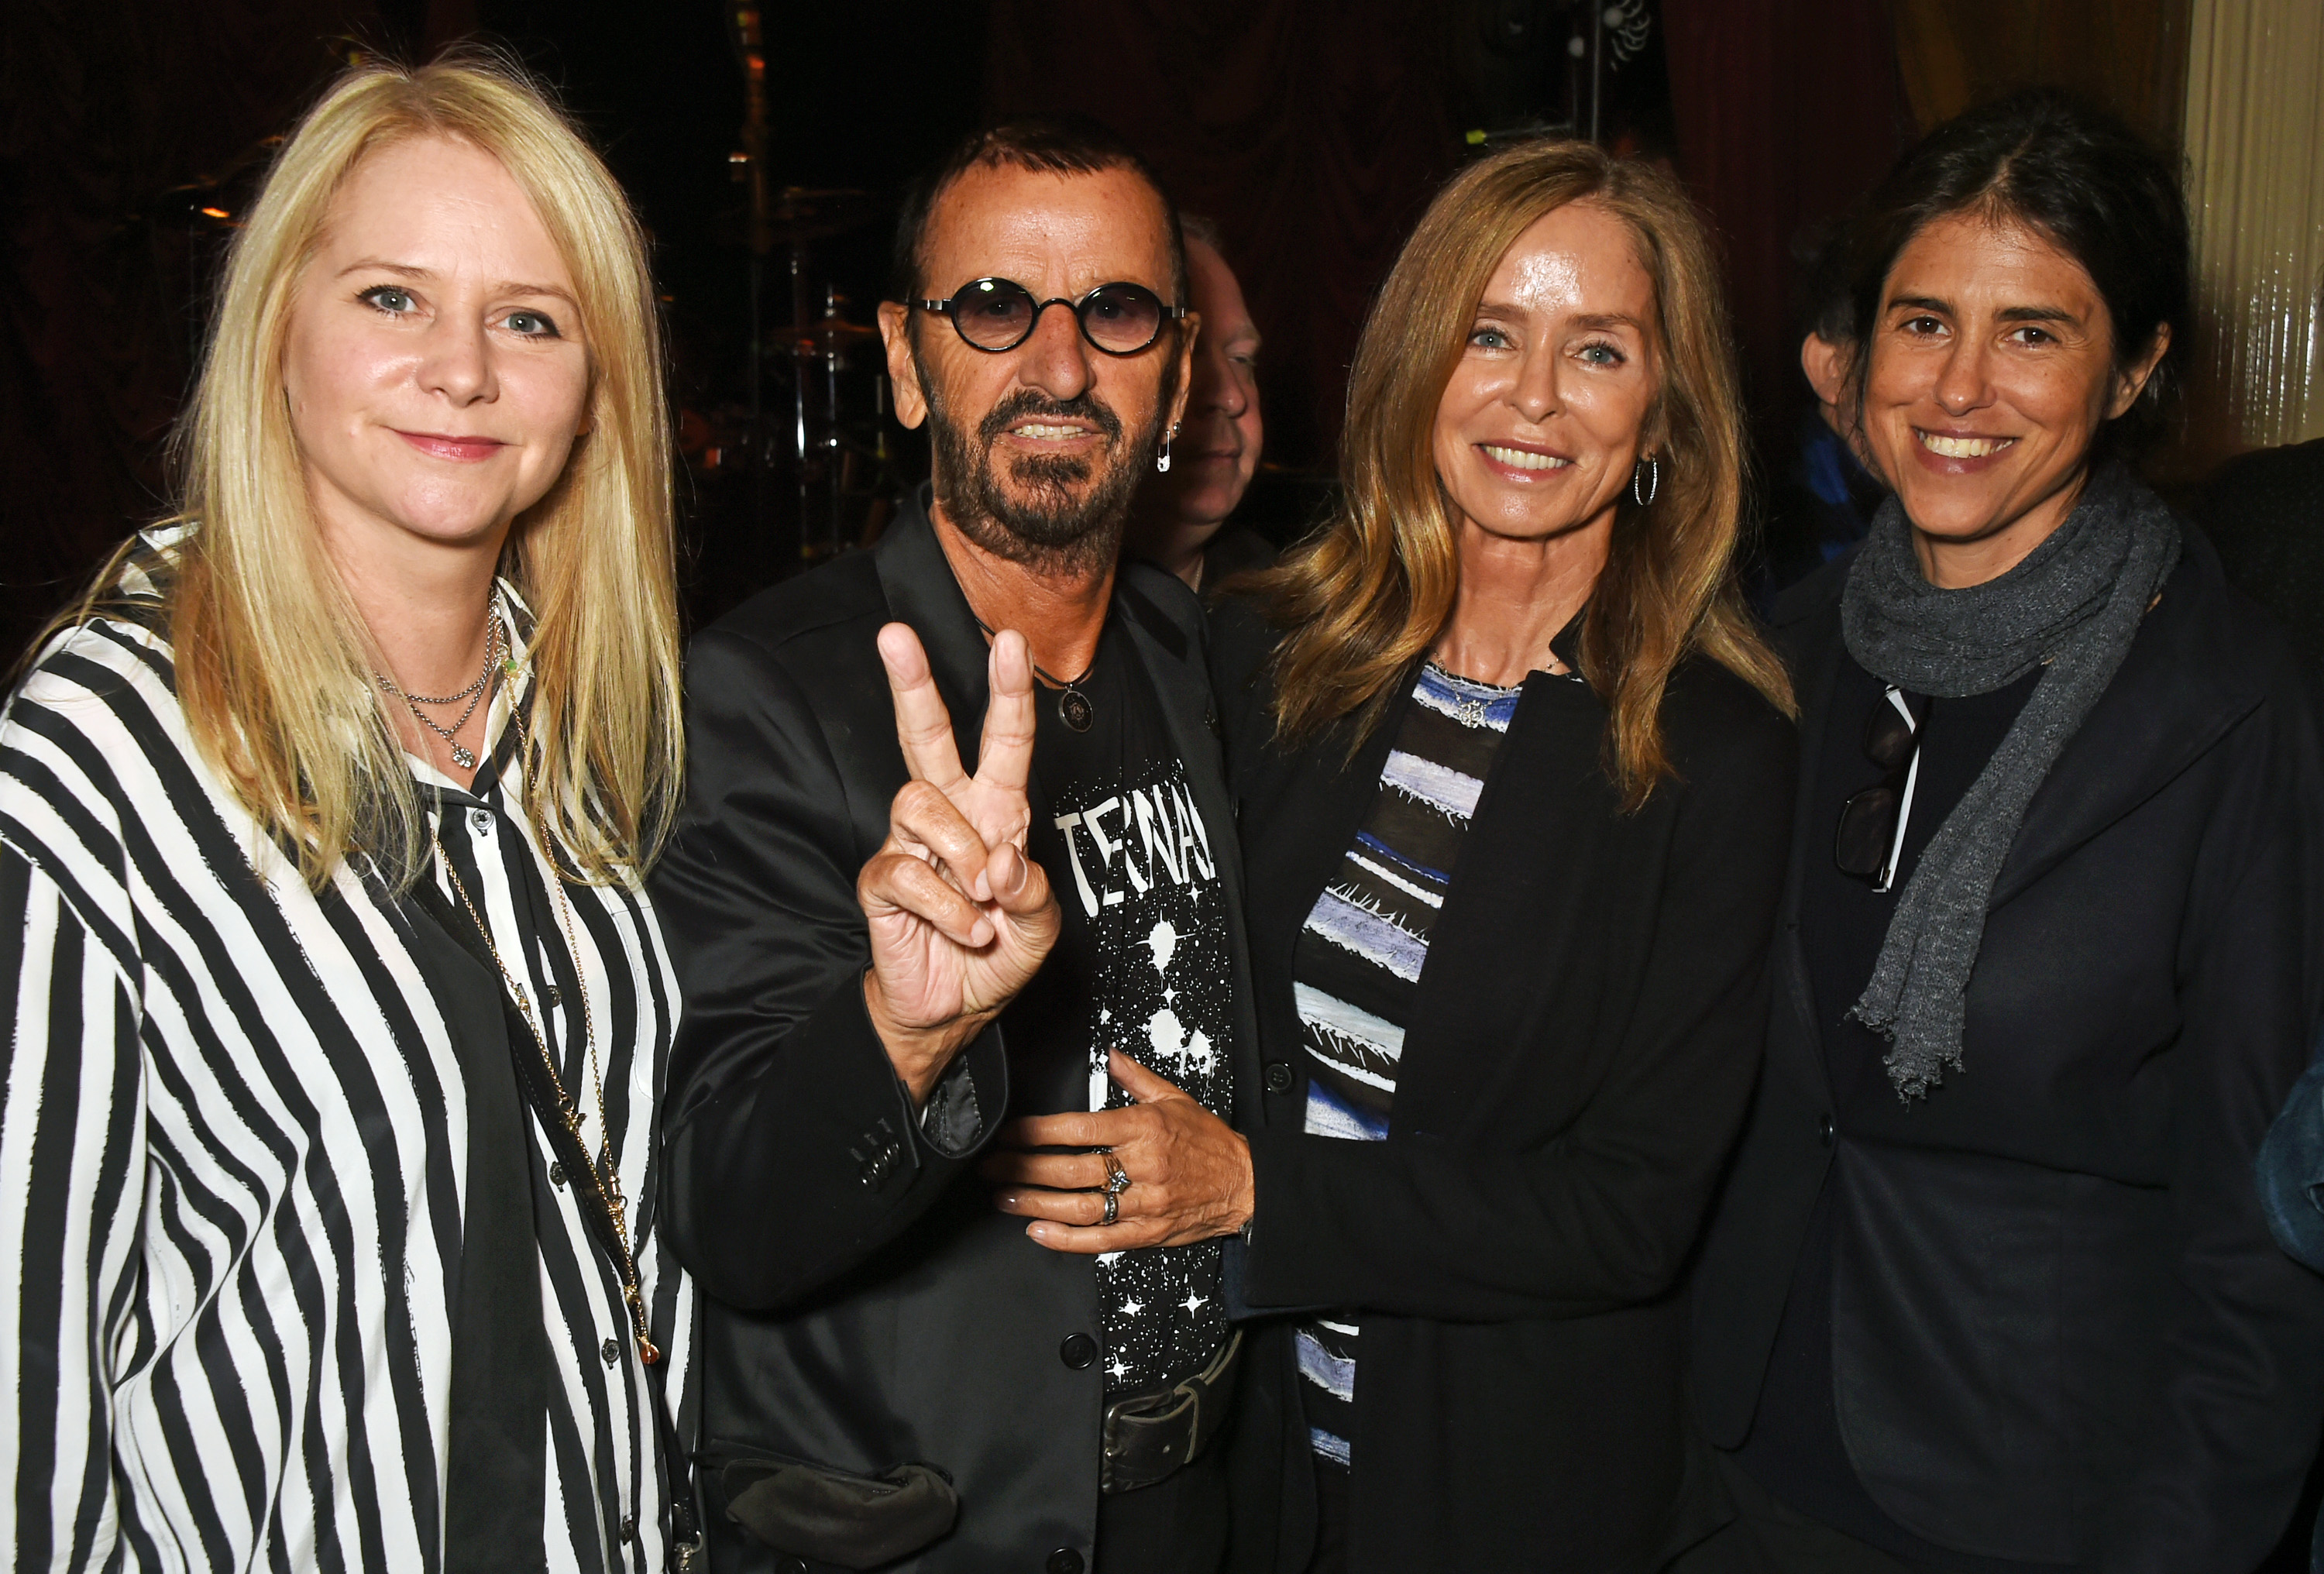 Lee Starkey, Ringo Starr, Barbara Bach, and Francesca Gregorini at the launch of "Issues," a new album by SSHH on September 5, 2016, in London, England | Source: Getty Images